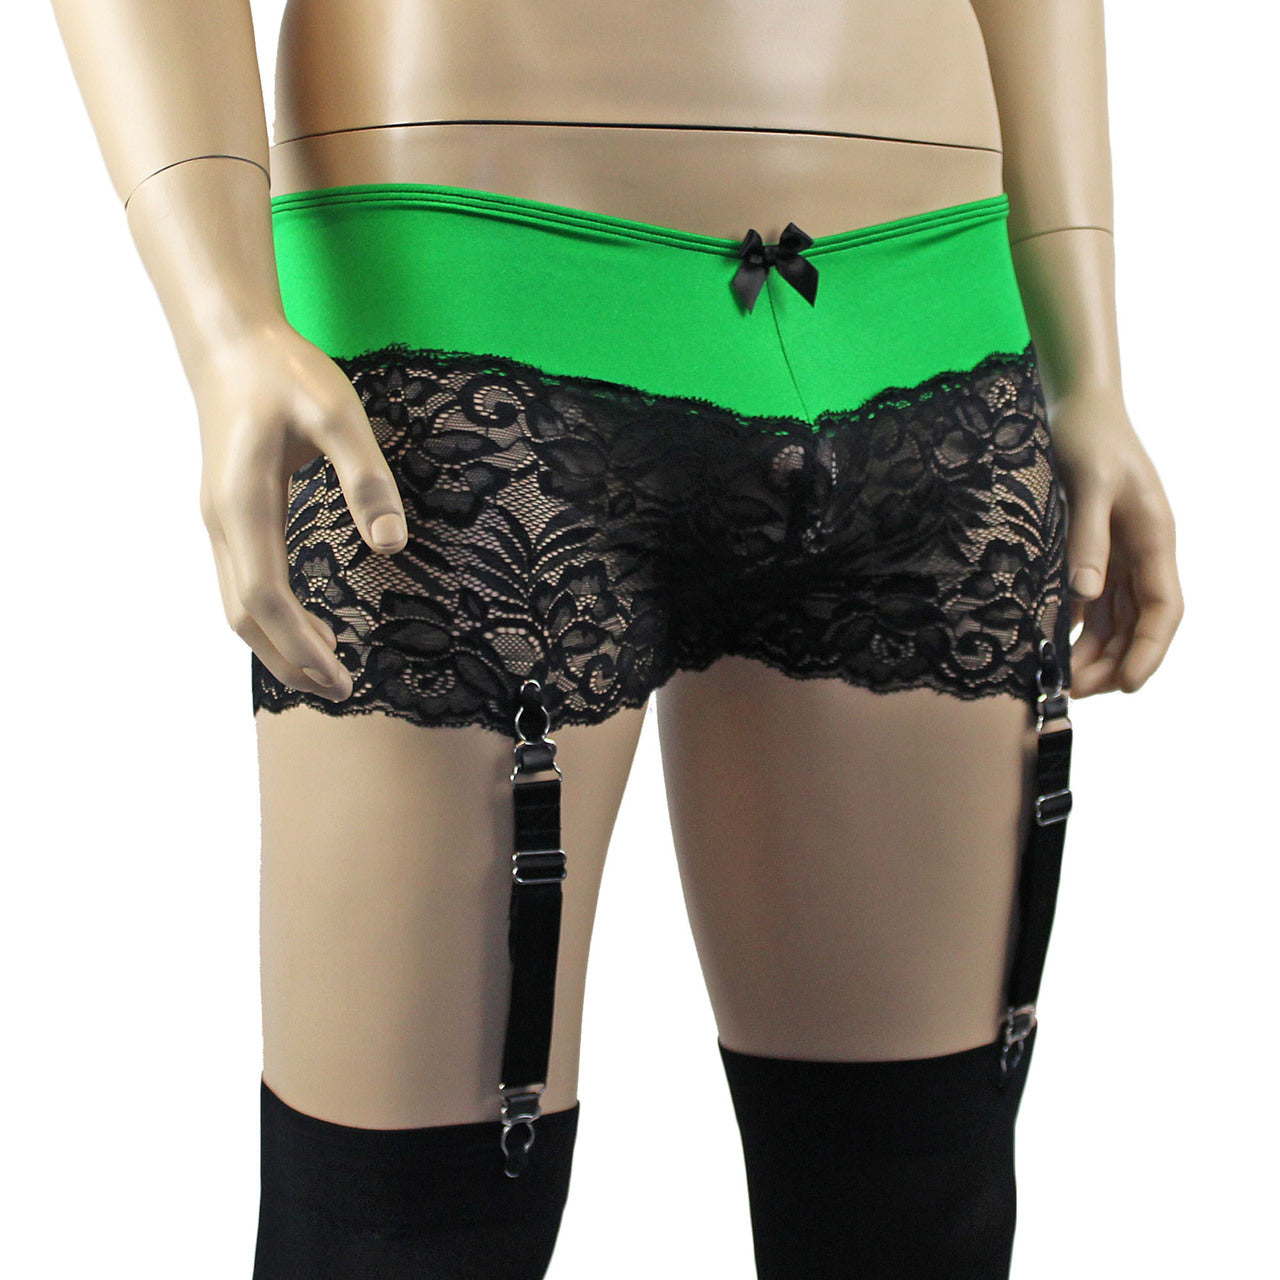 Mens Risque Boxer Briefs with Detachable Garters & Stockings Green and Black Lace